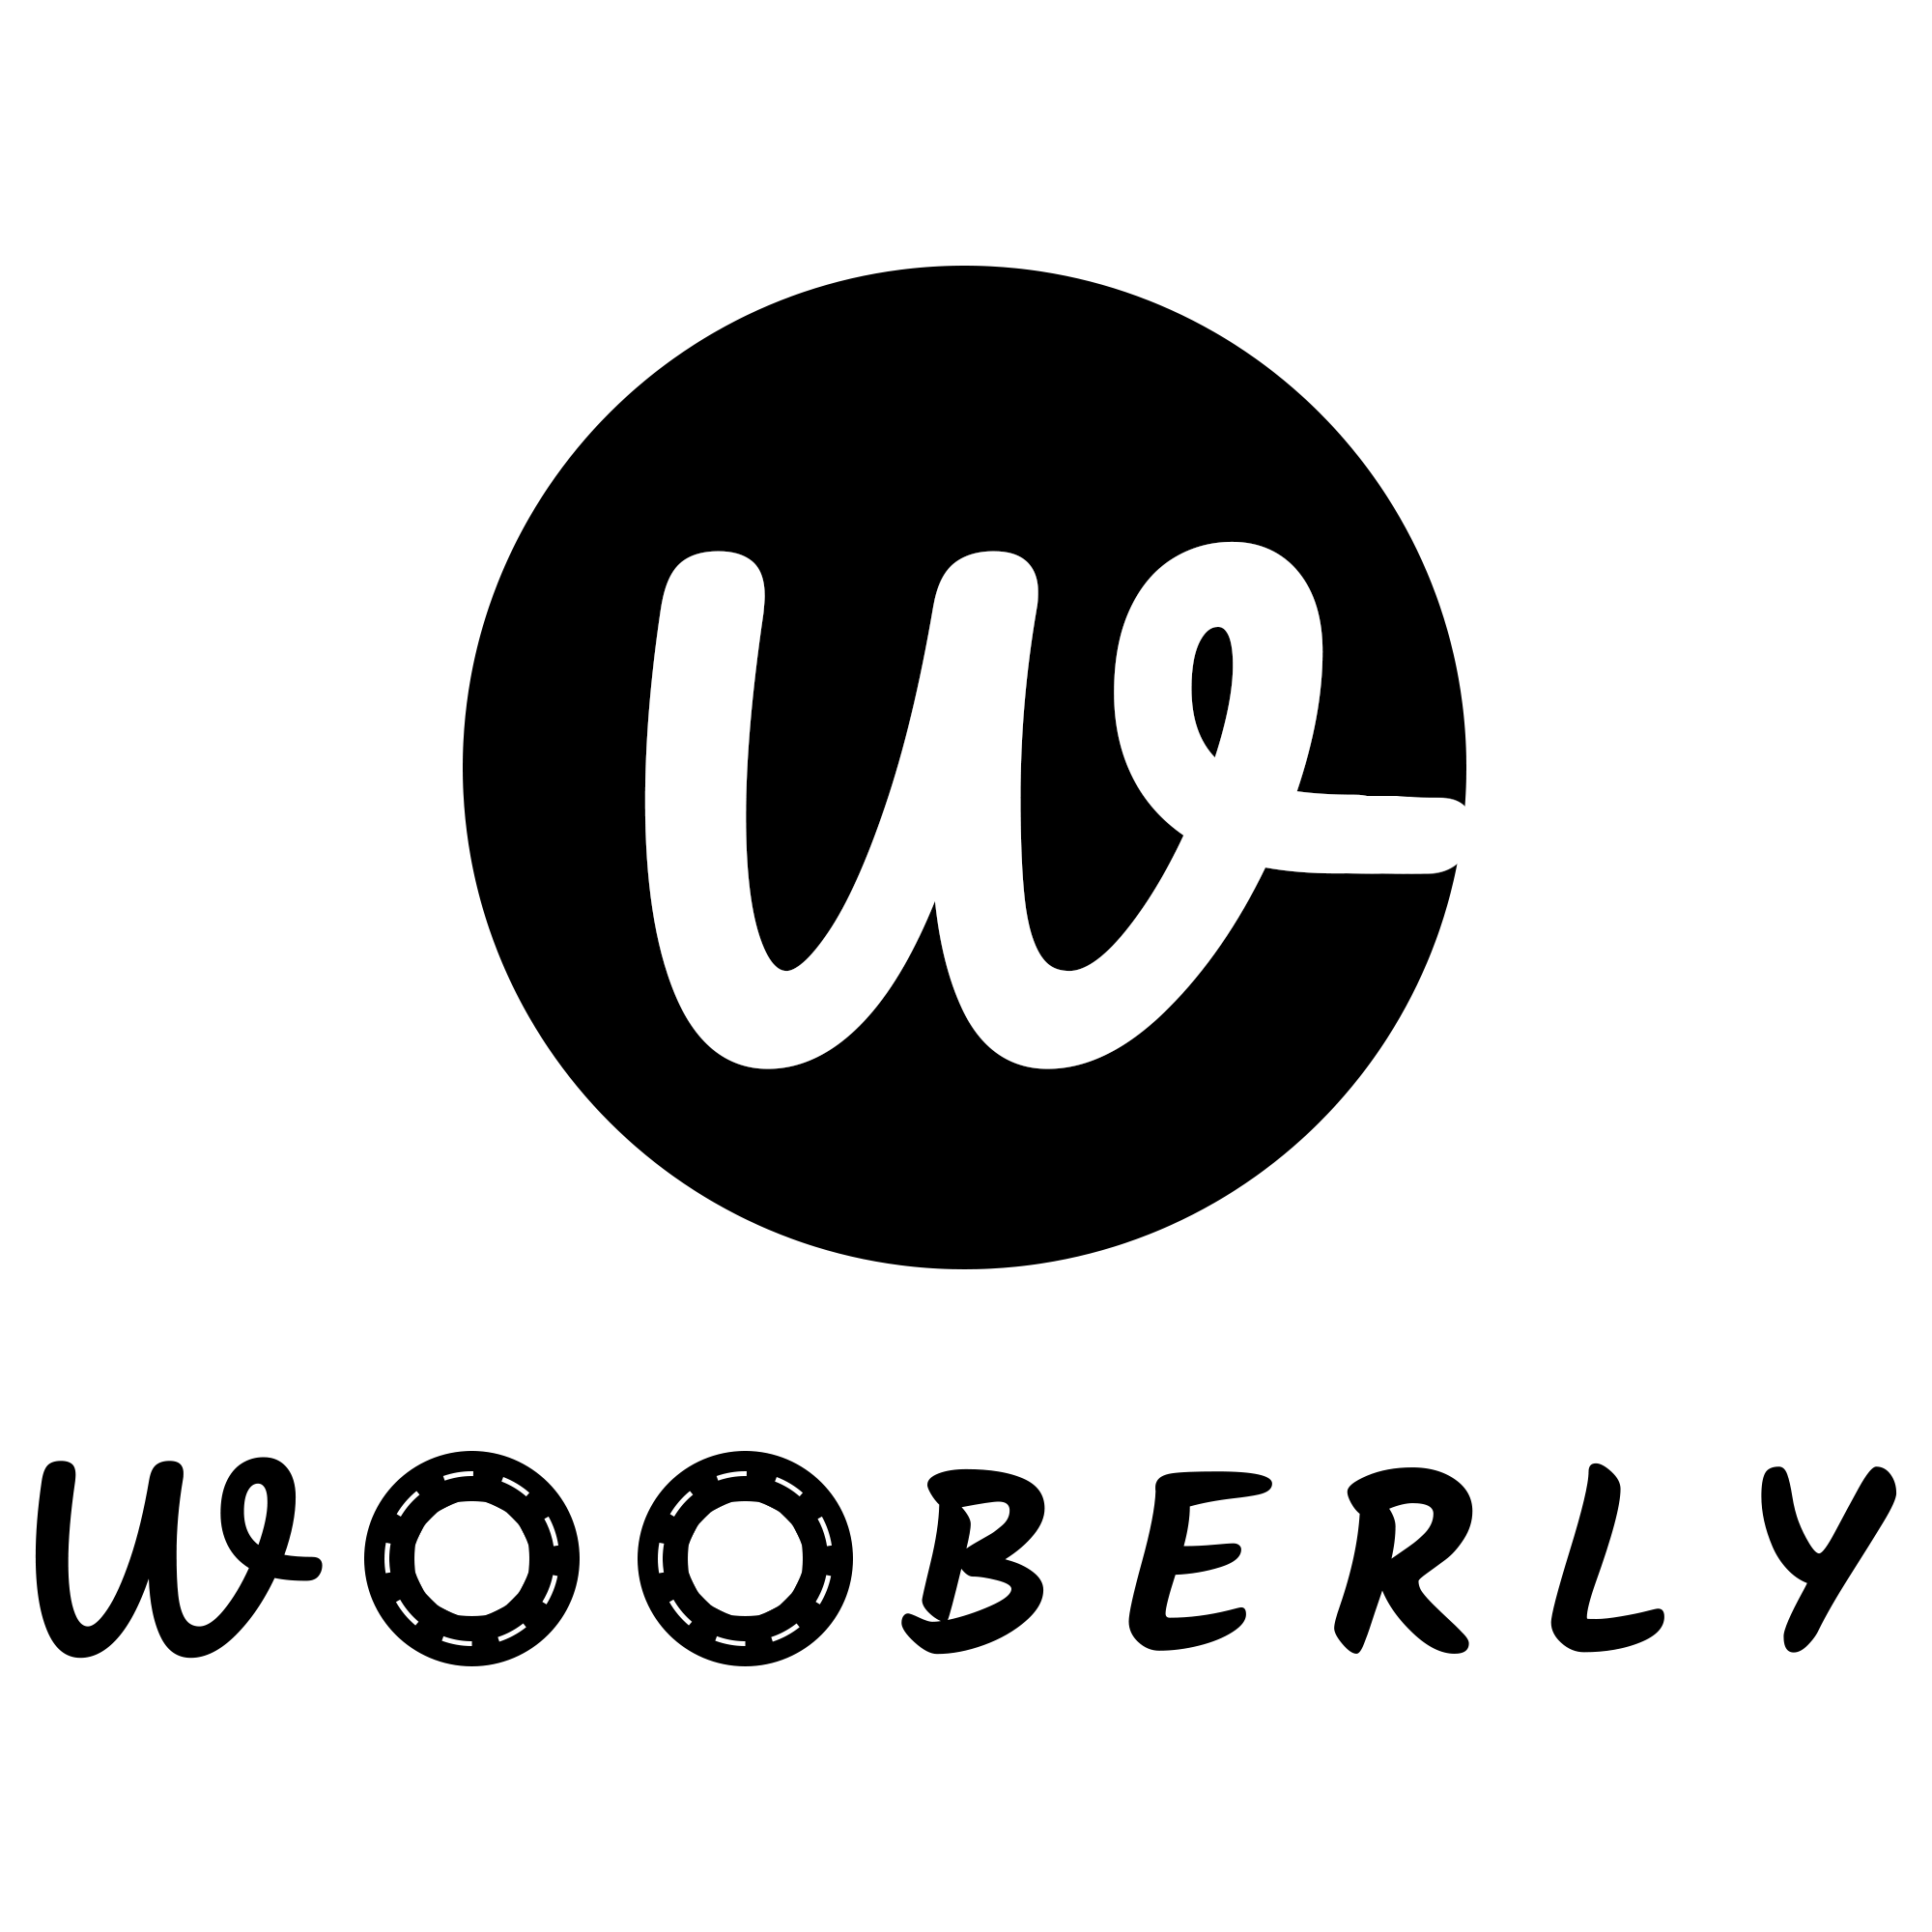 Wooberly - Uber clone app|IT Services|Professional Services